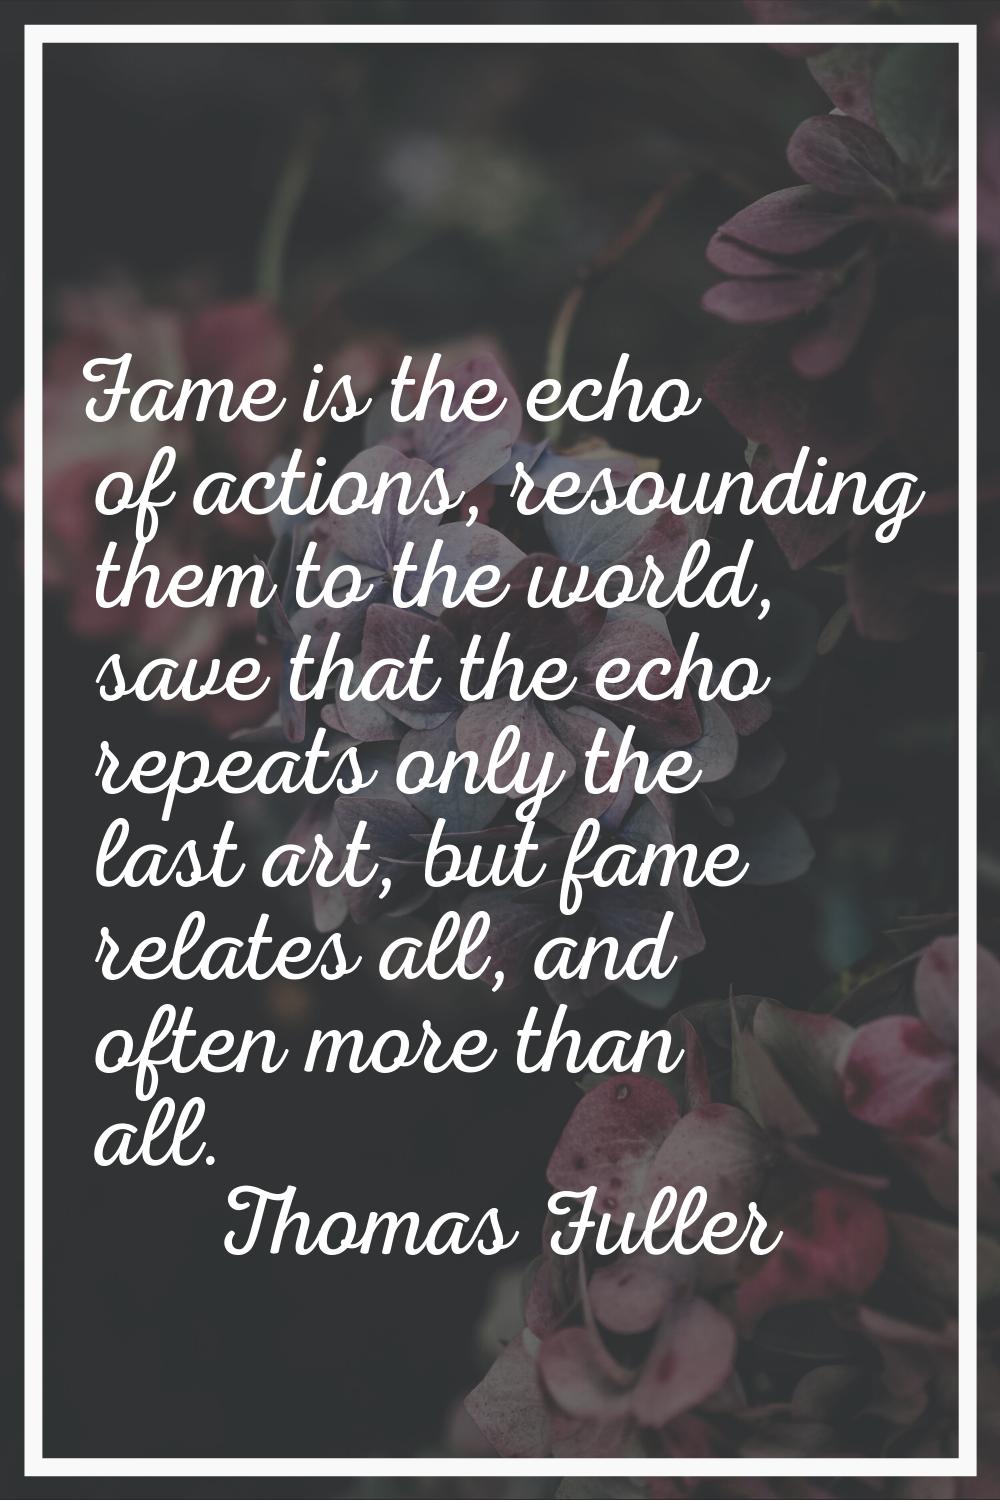 Fame is the echo of actions, resounding them to the world, save that the echo repeats only the last